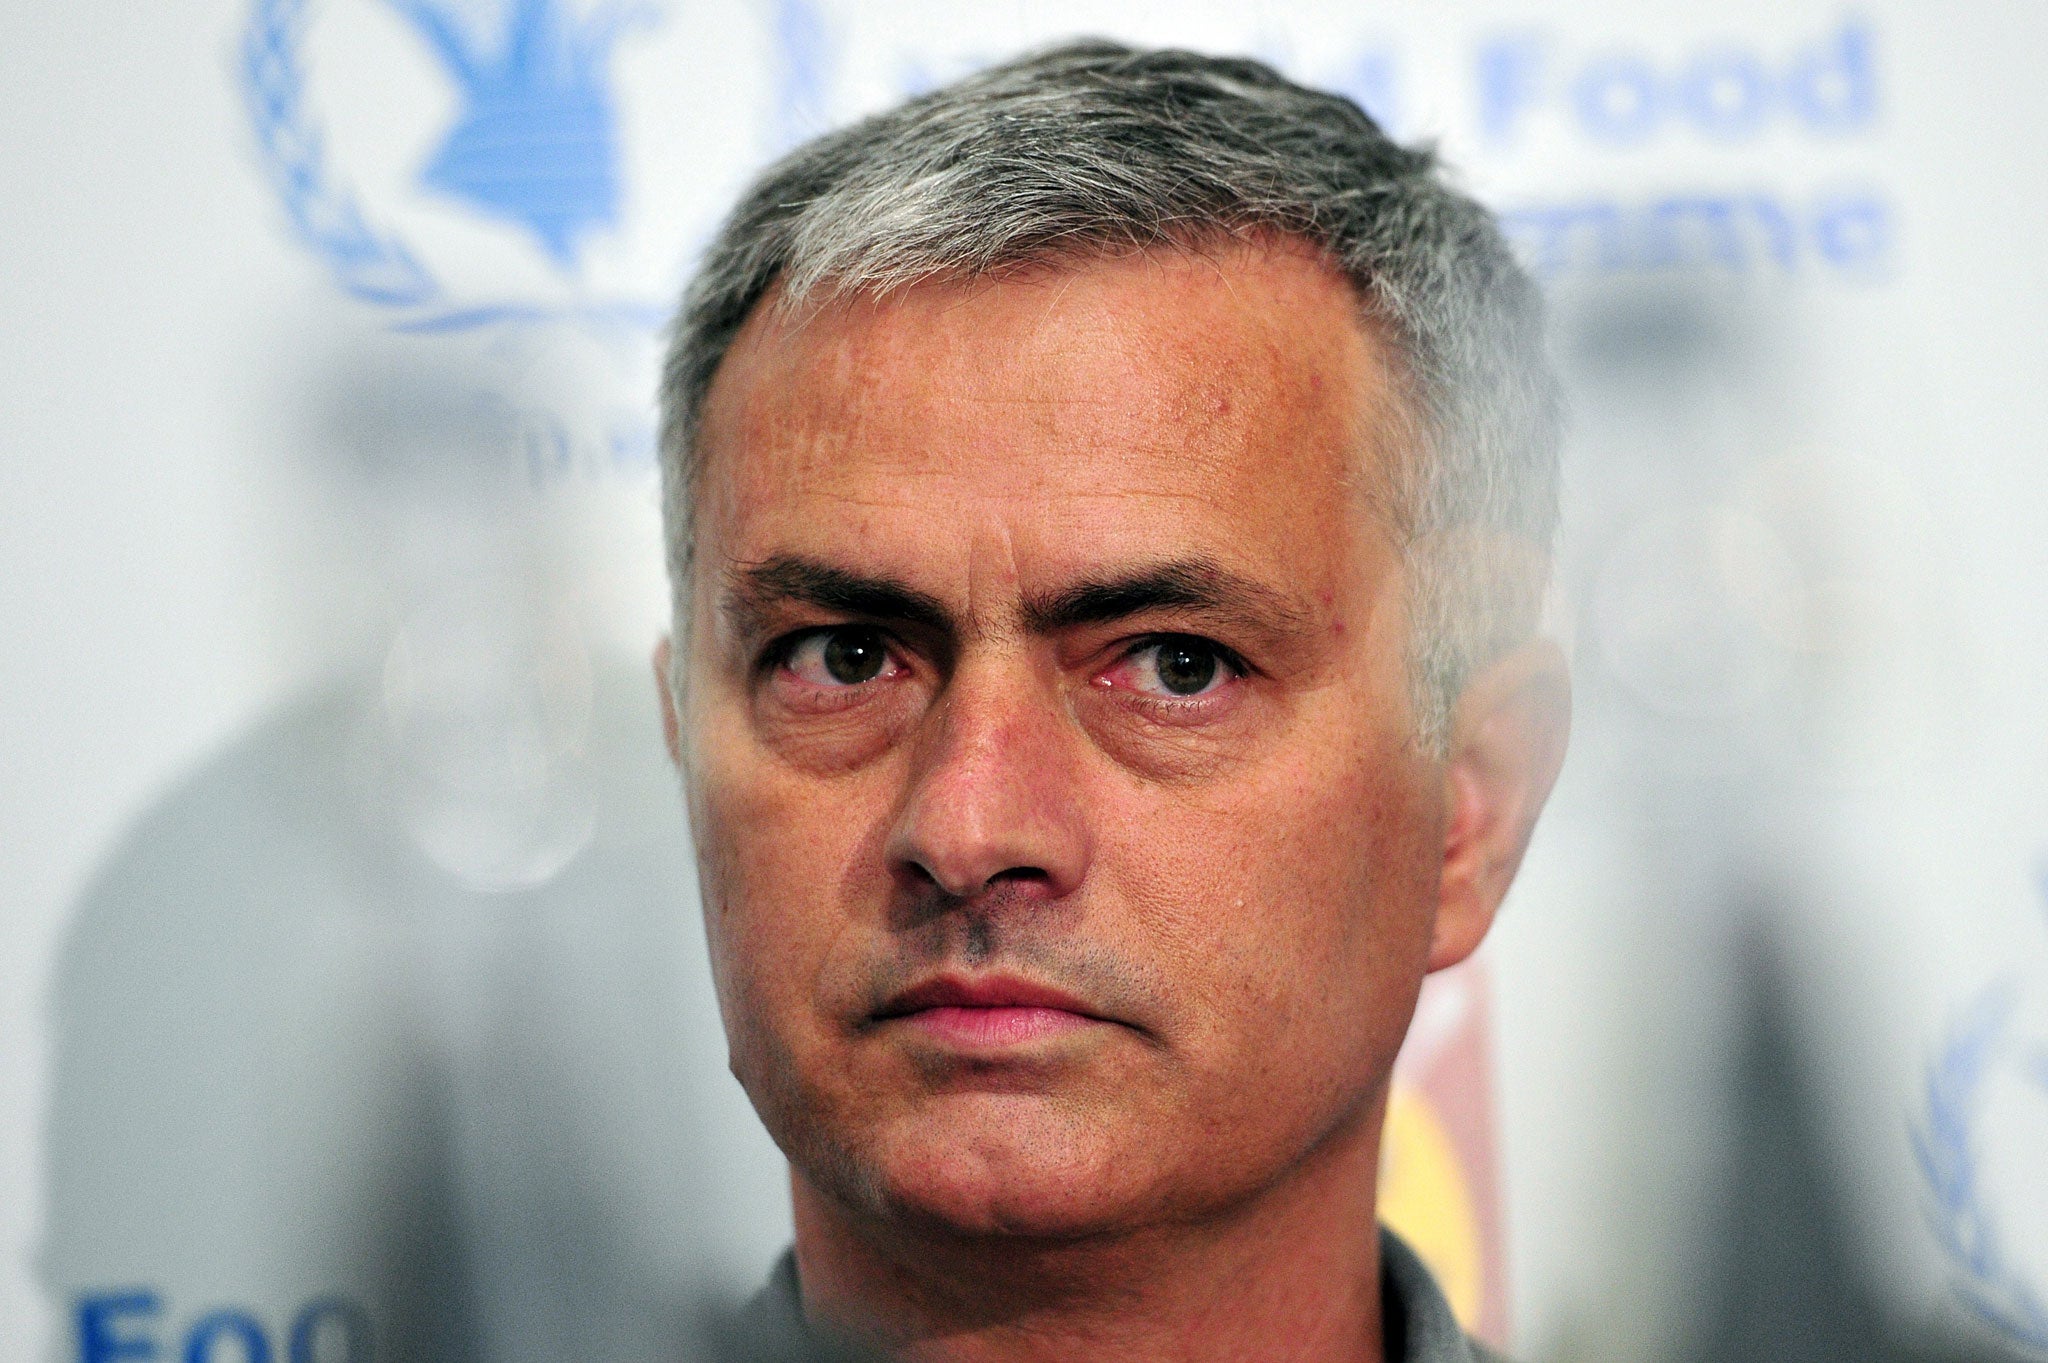 Jose Mourinho at a press conference announcing his UN role in London